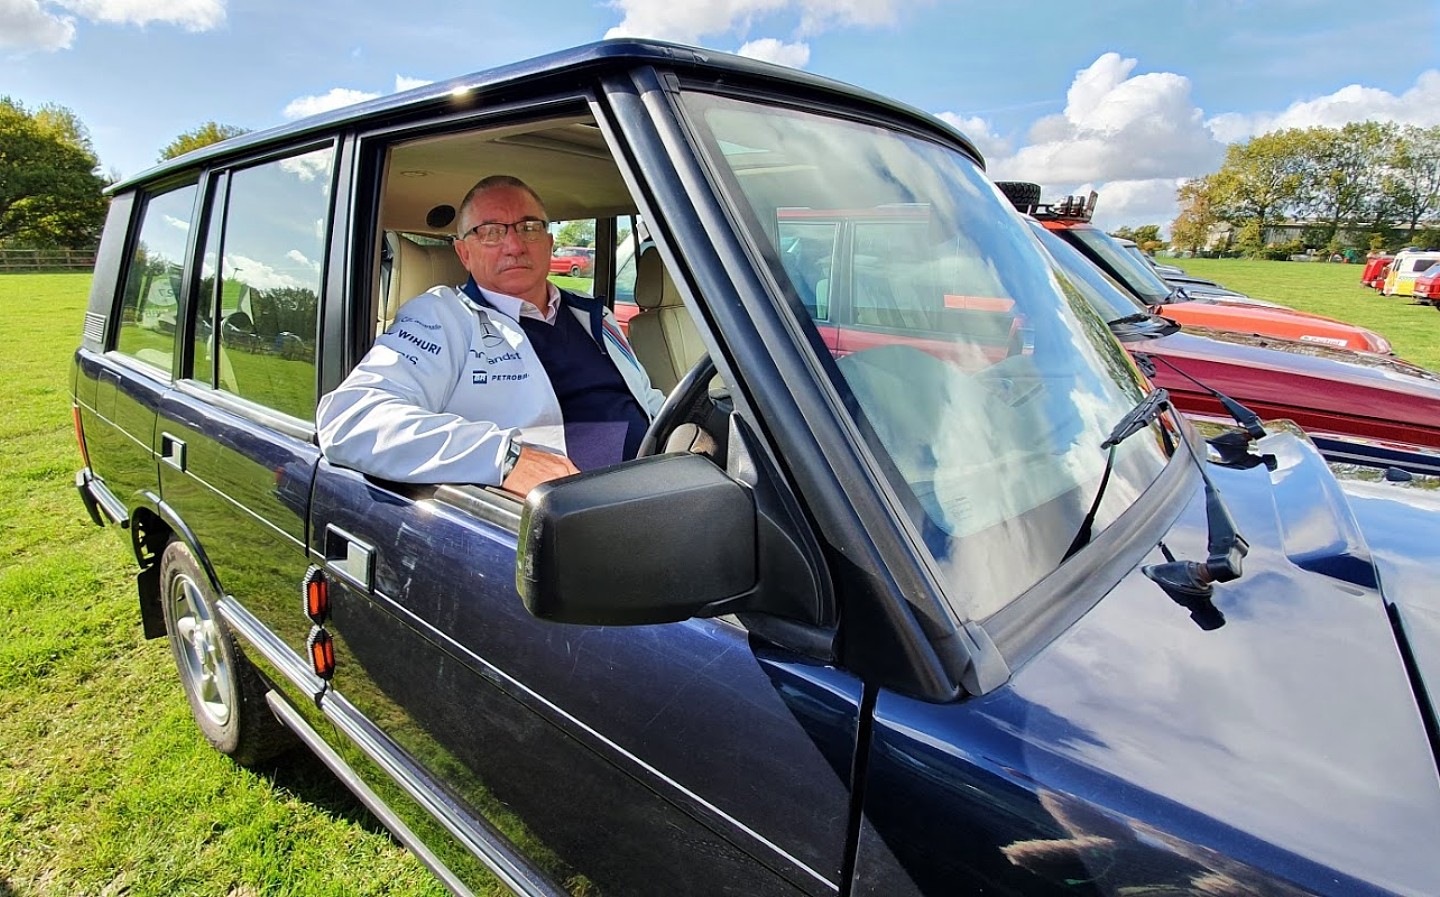 Range Rover fiftieth anniversary: From a Royal Rangie to one bought by a member of Queen, meet the star cars and their owners - Dick Malone